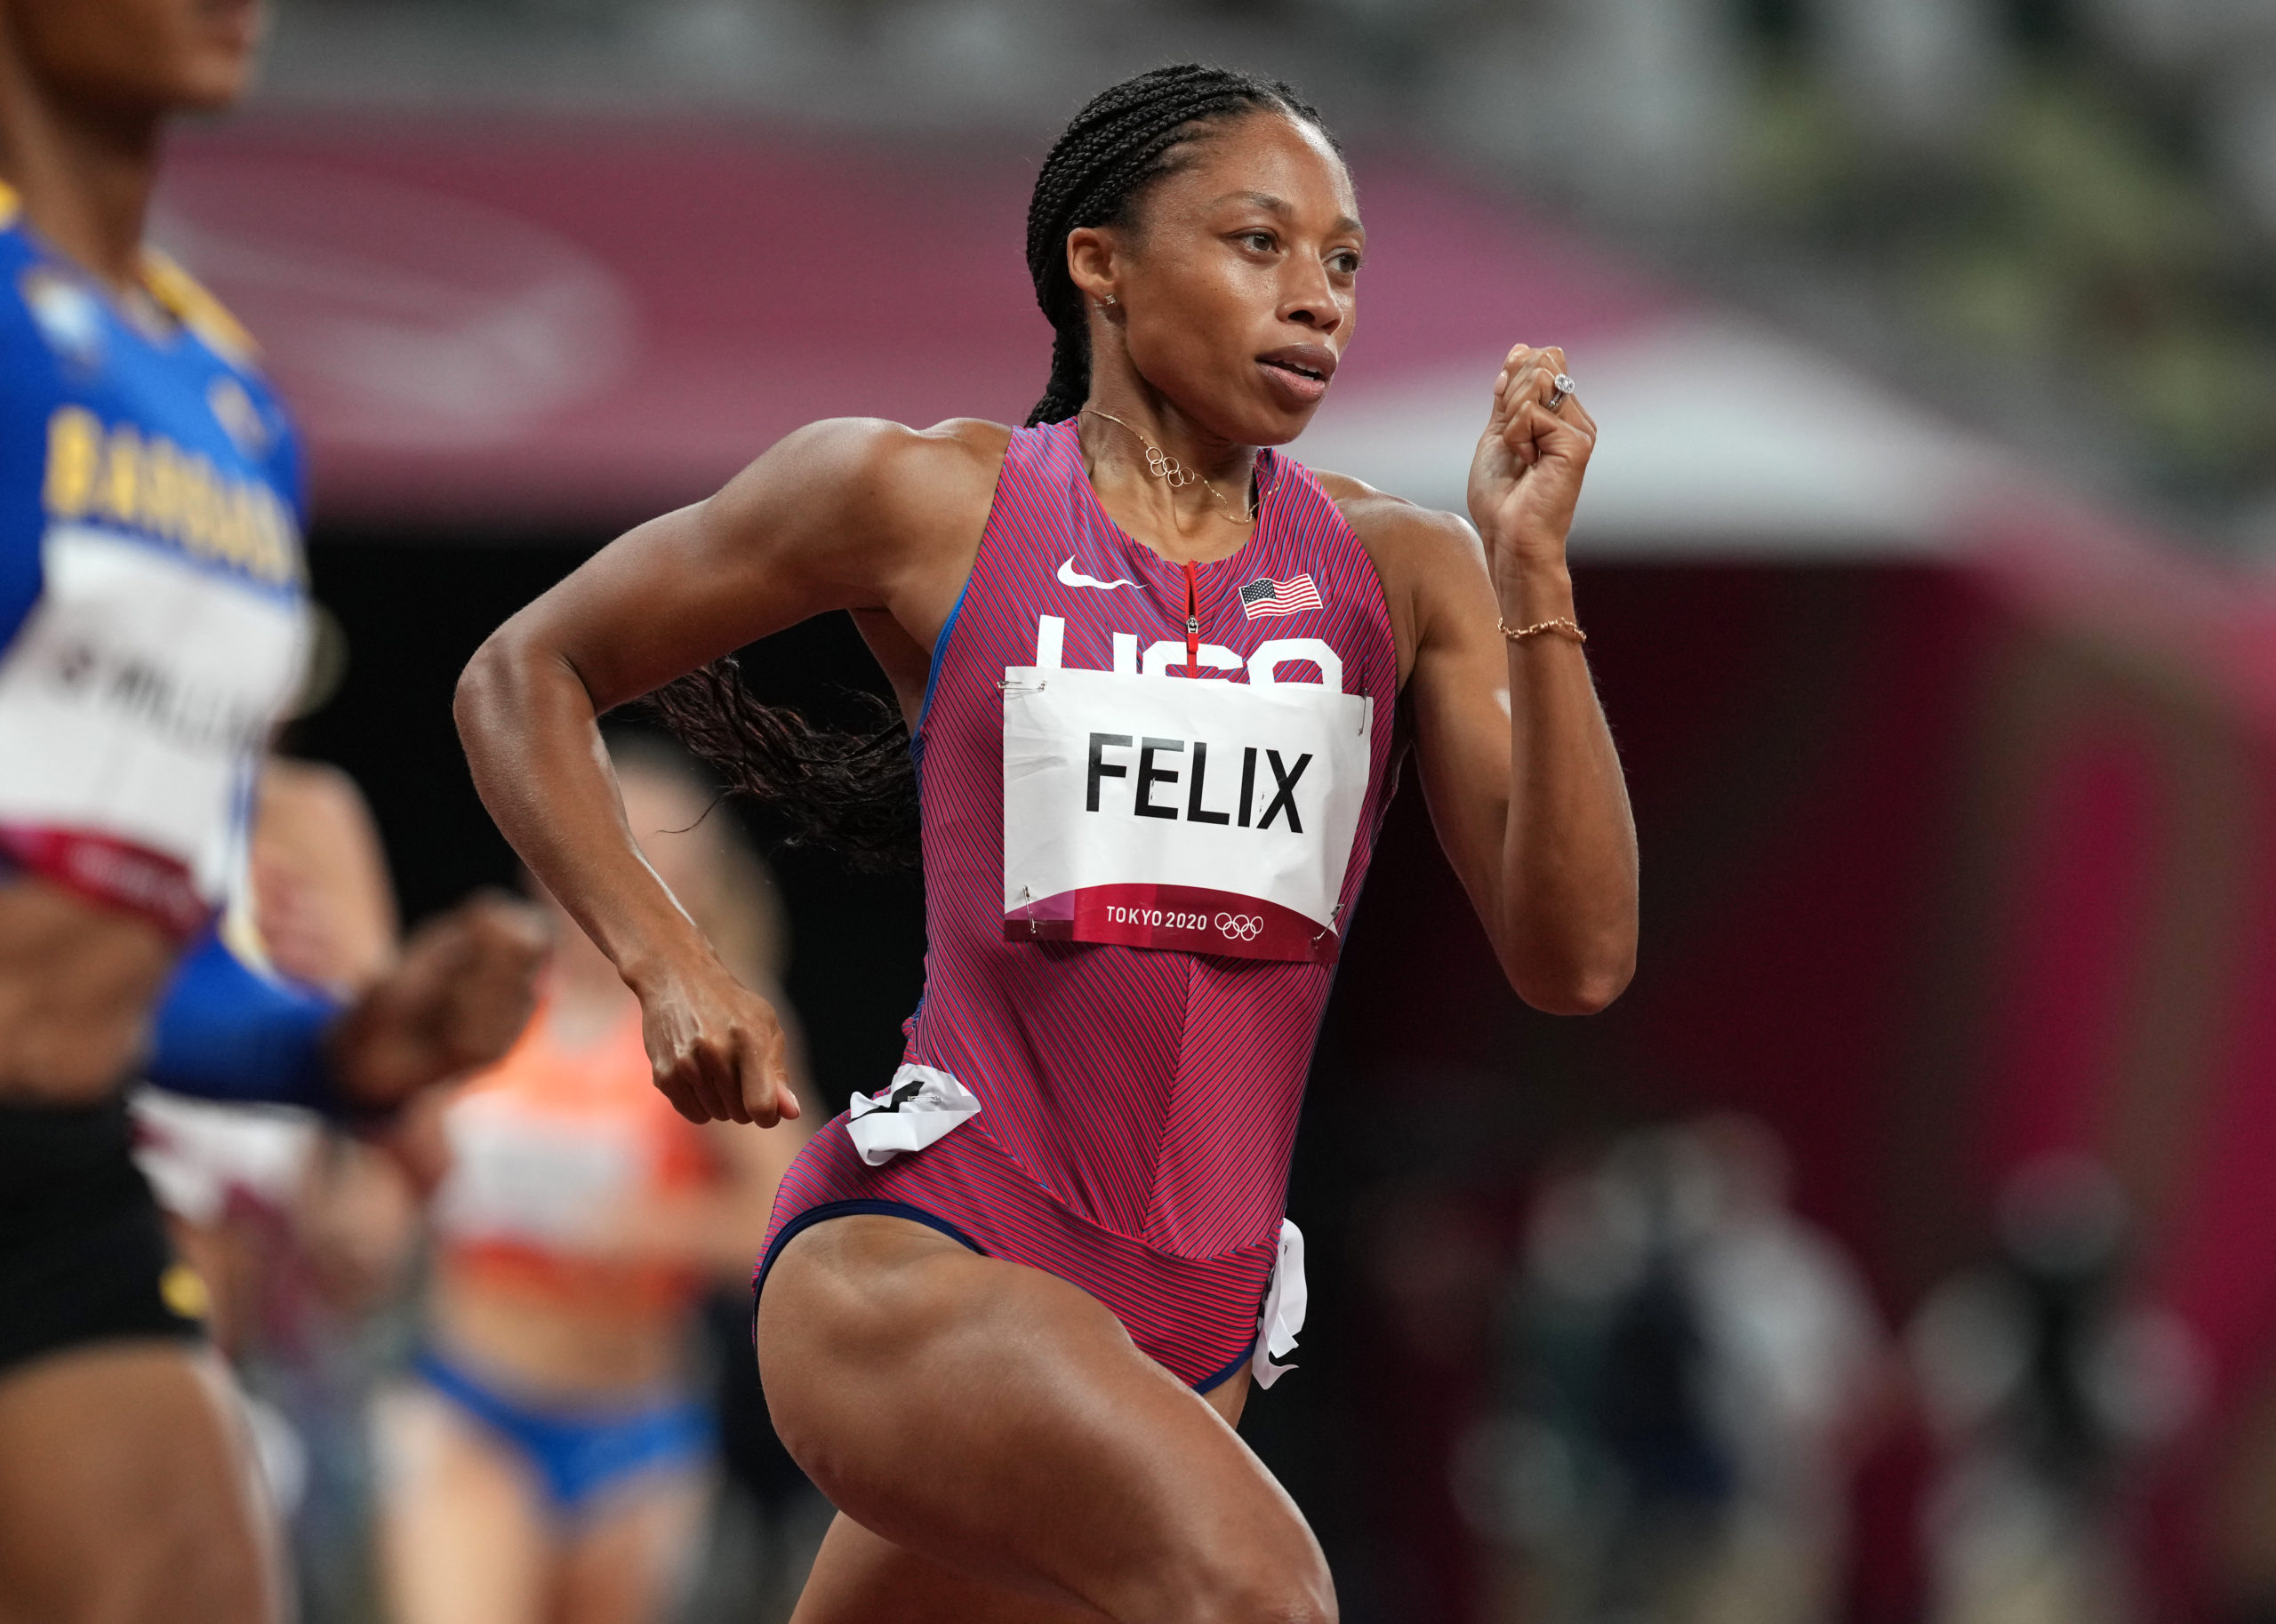 Allyson Felix: Top moments from her record-breaking career - Just